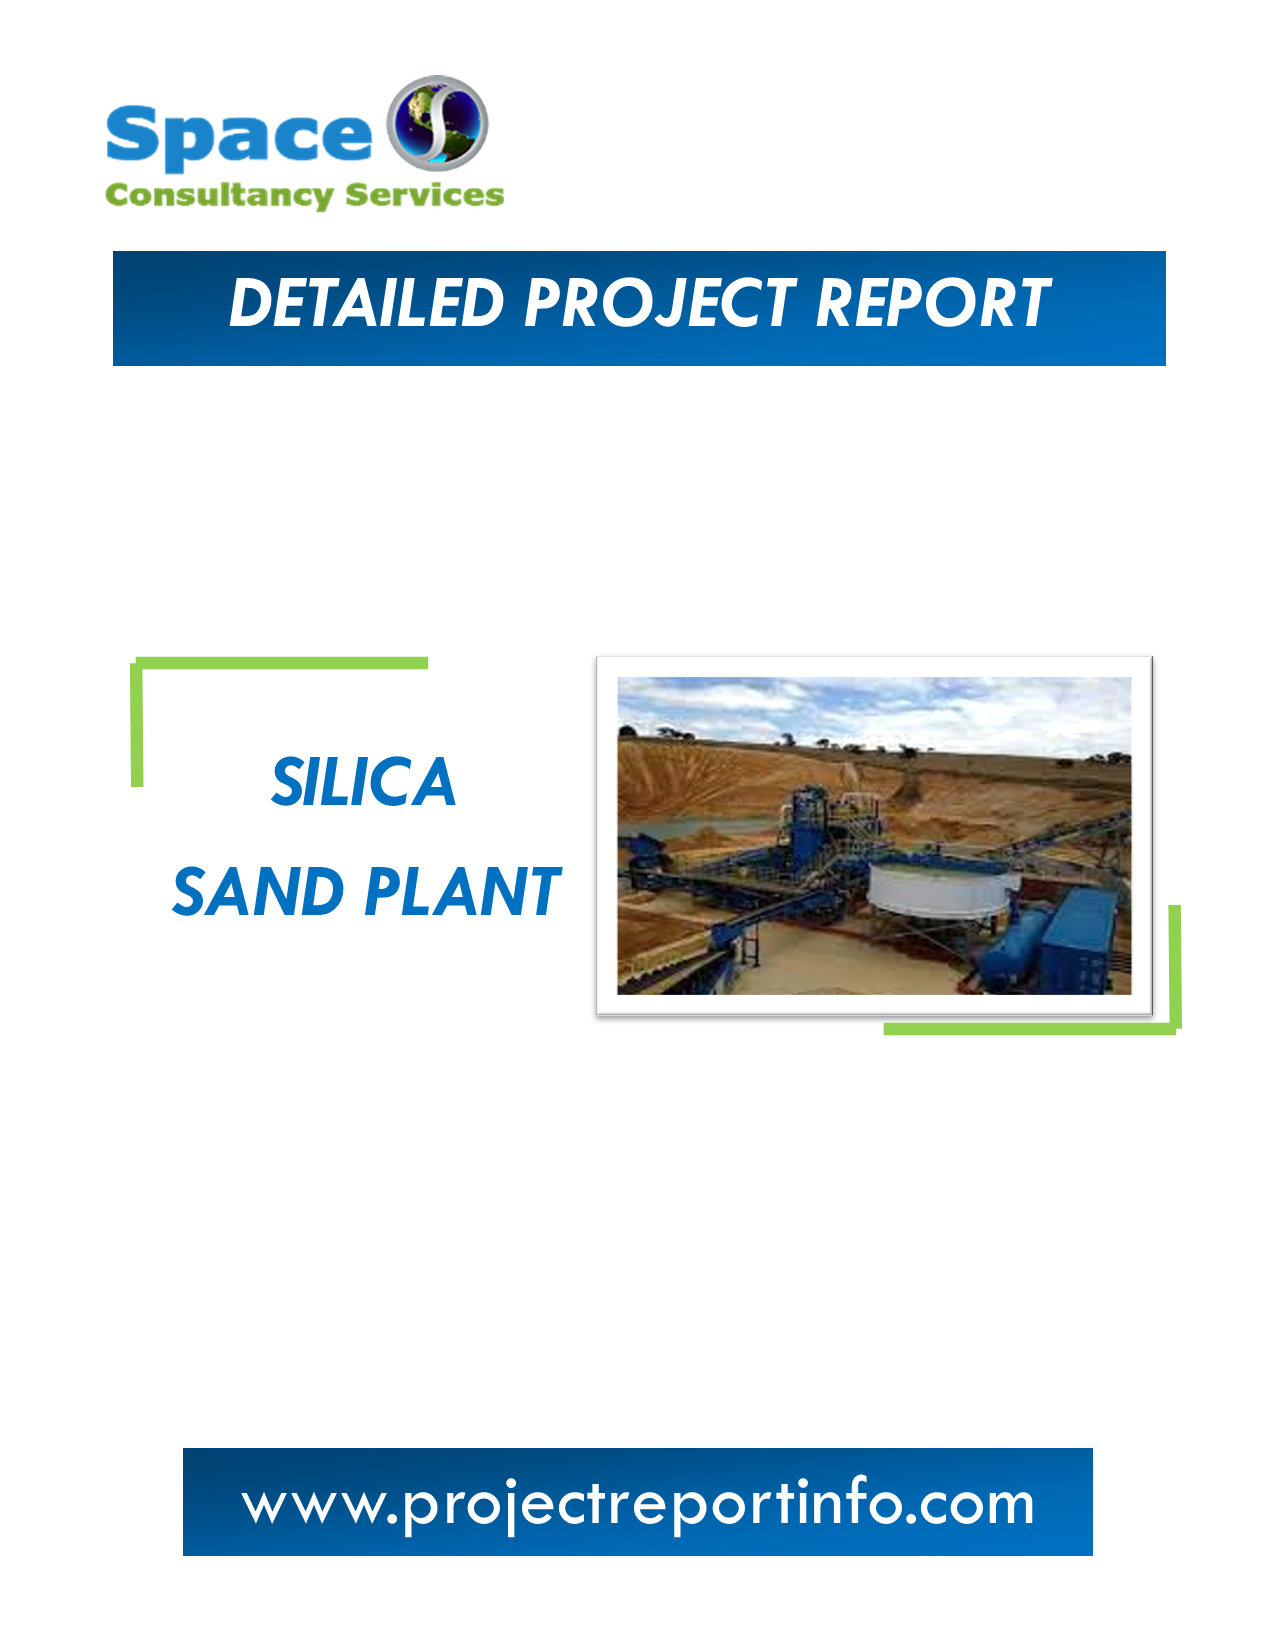 Project Report on Silica Sand Pant